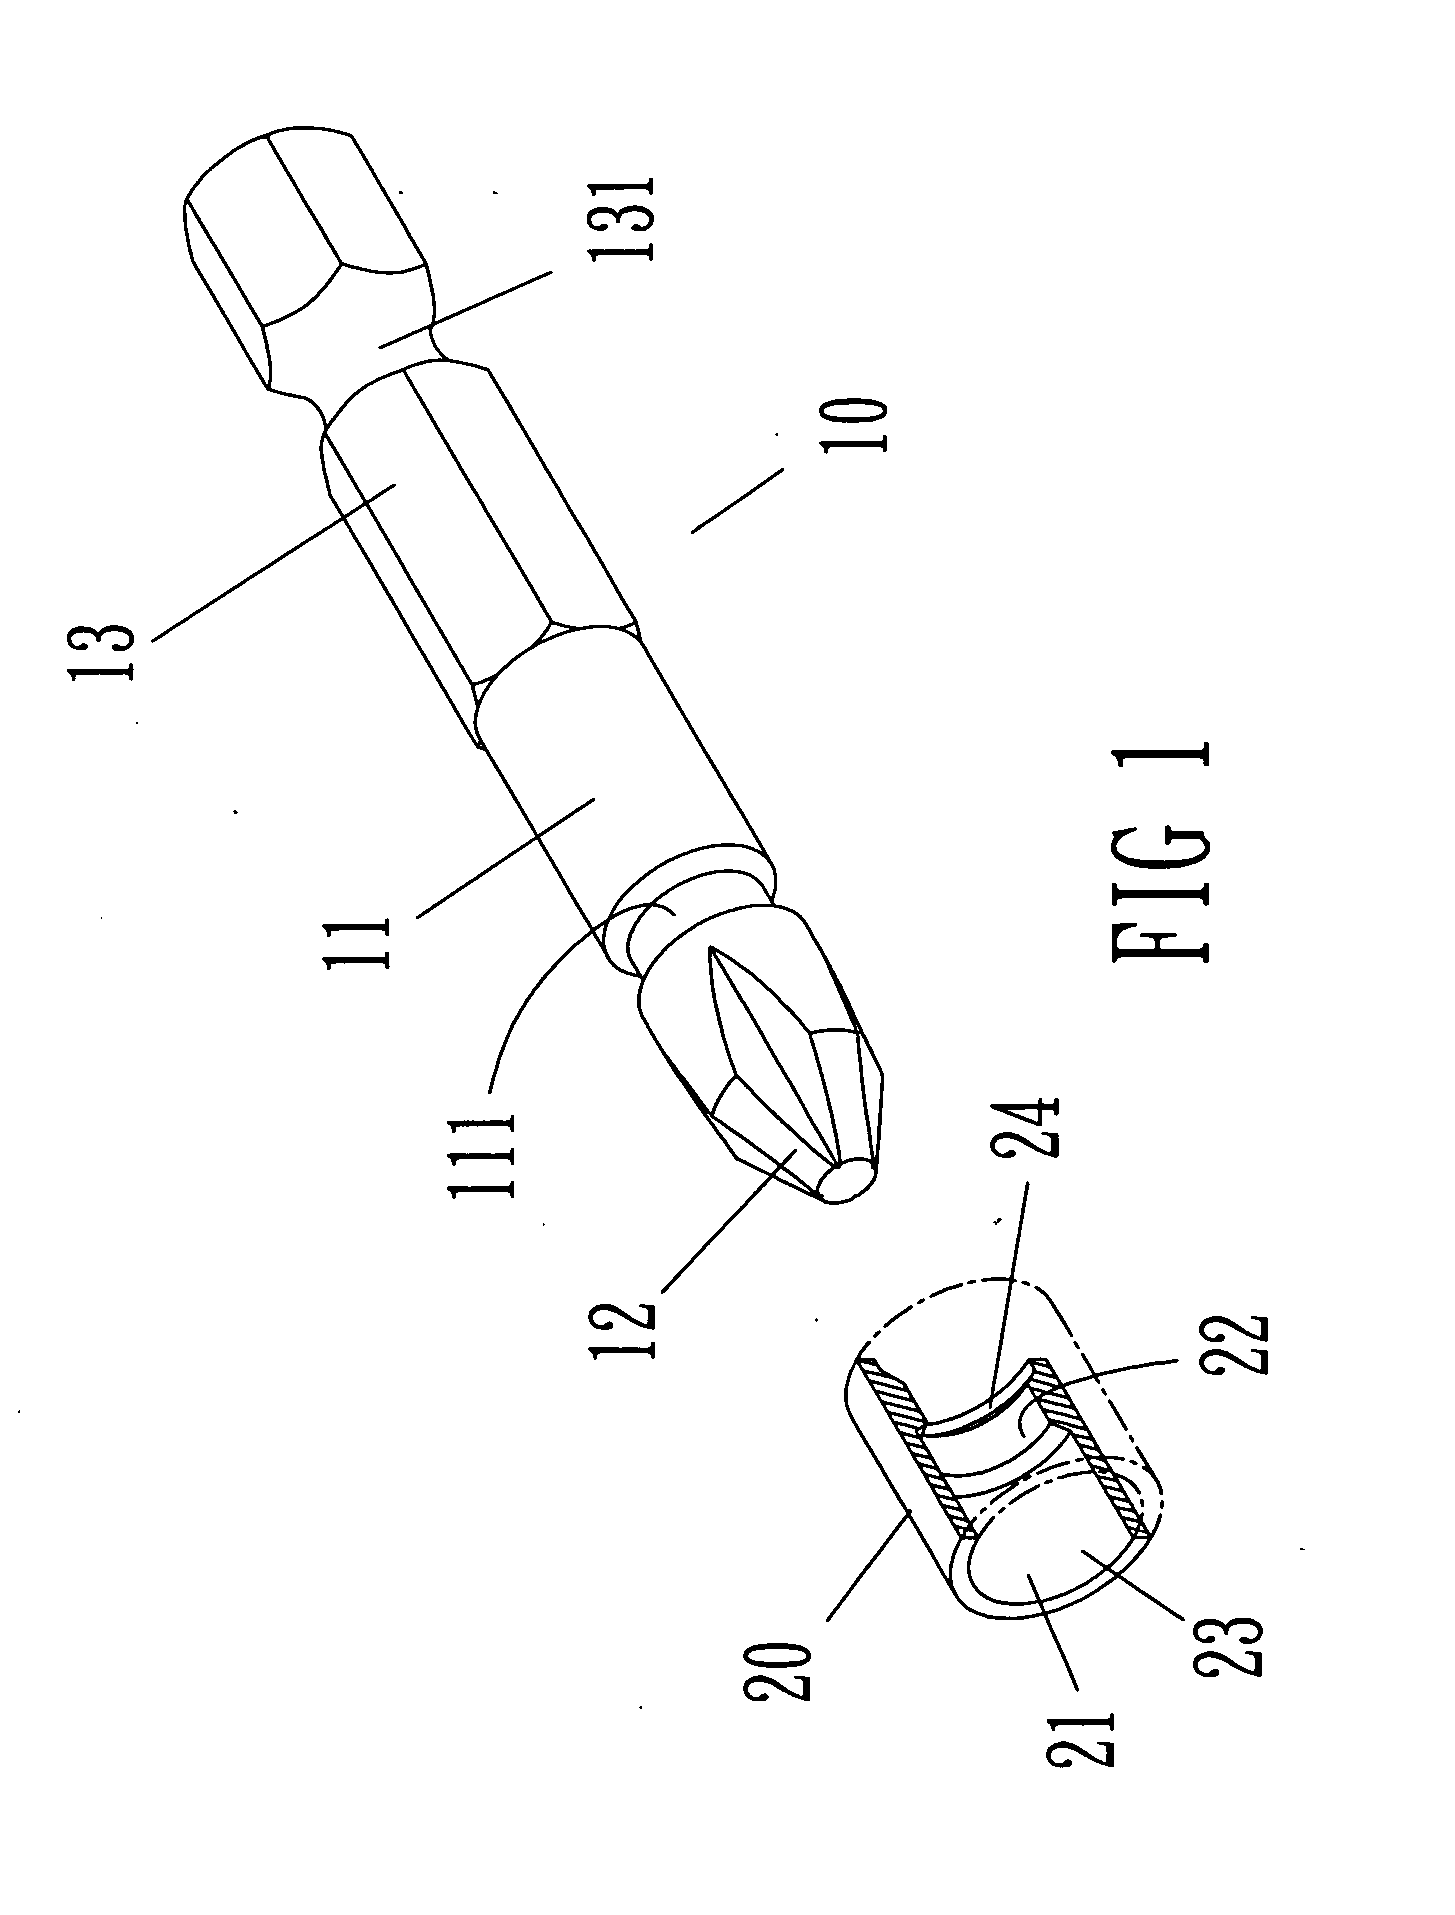 Screwdriver bit structure having auxiliary positioning function